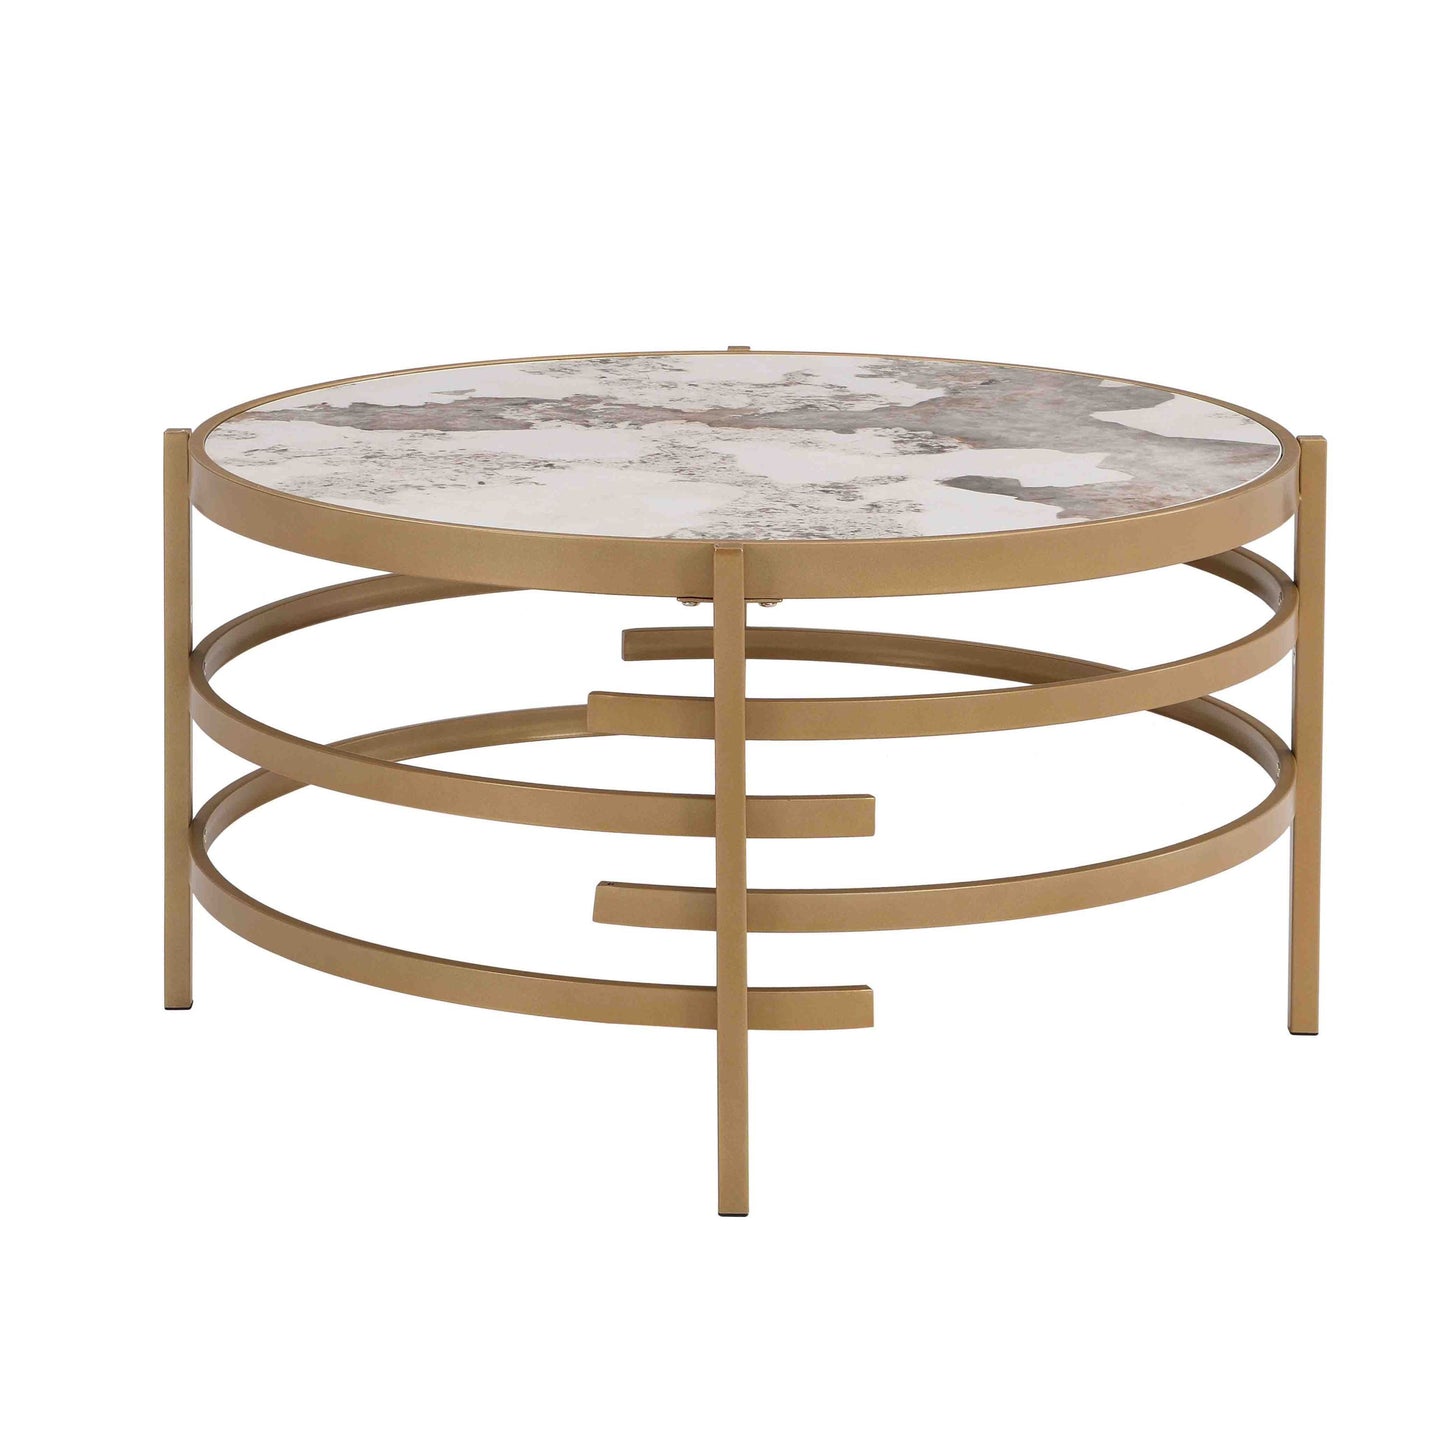 Sintered Stone Coffee Table (gold)